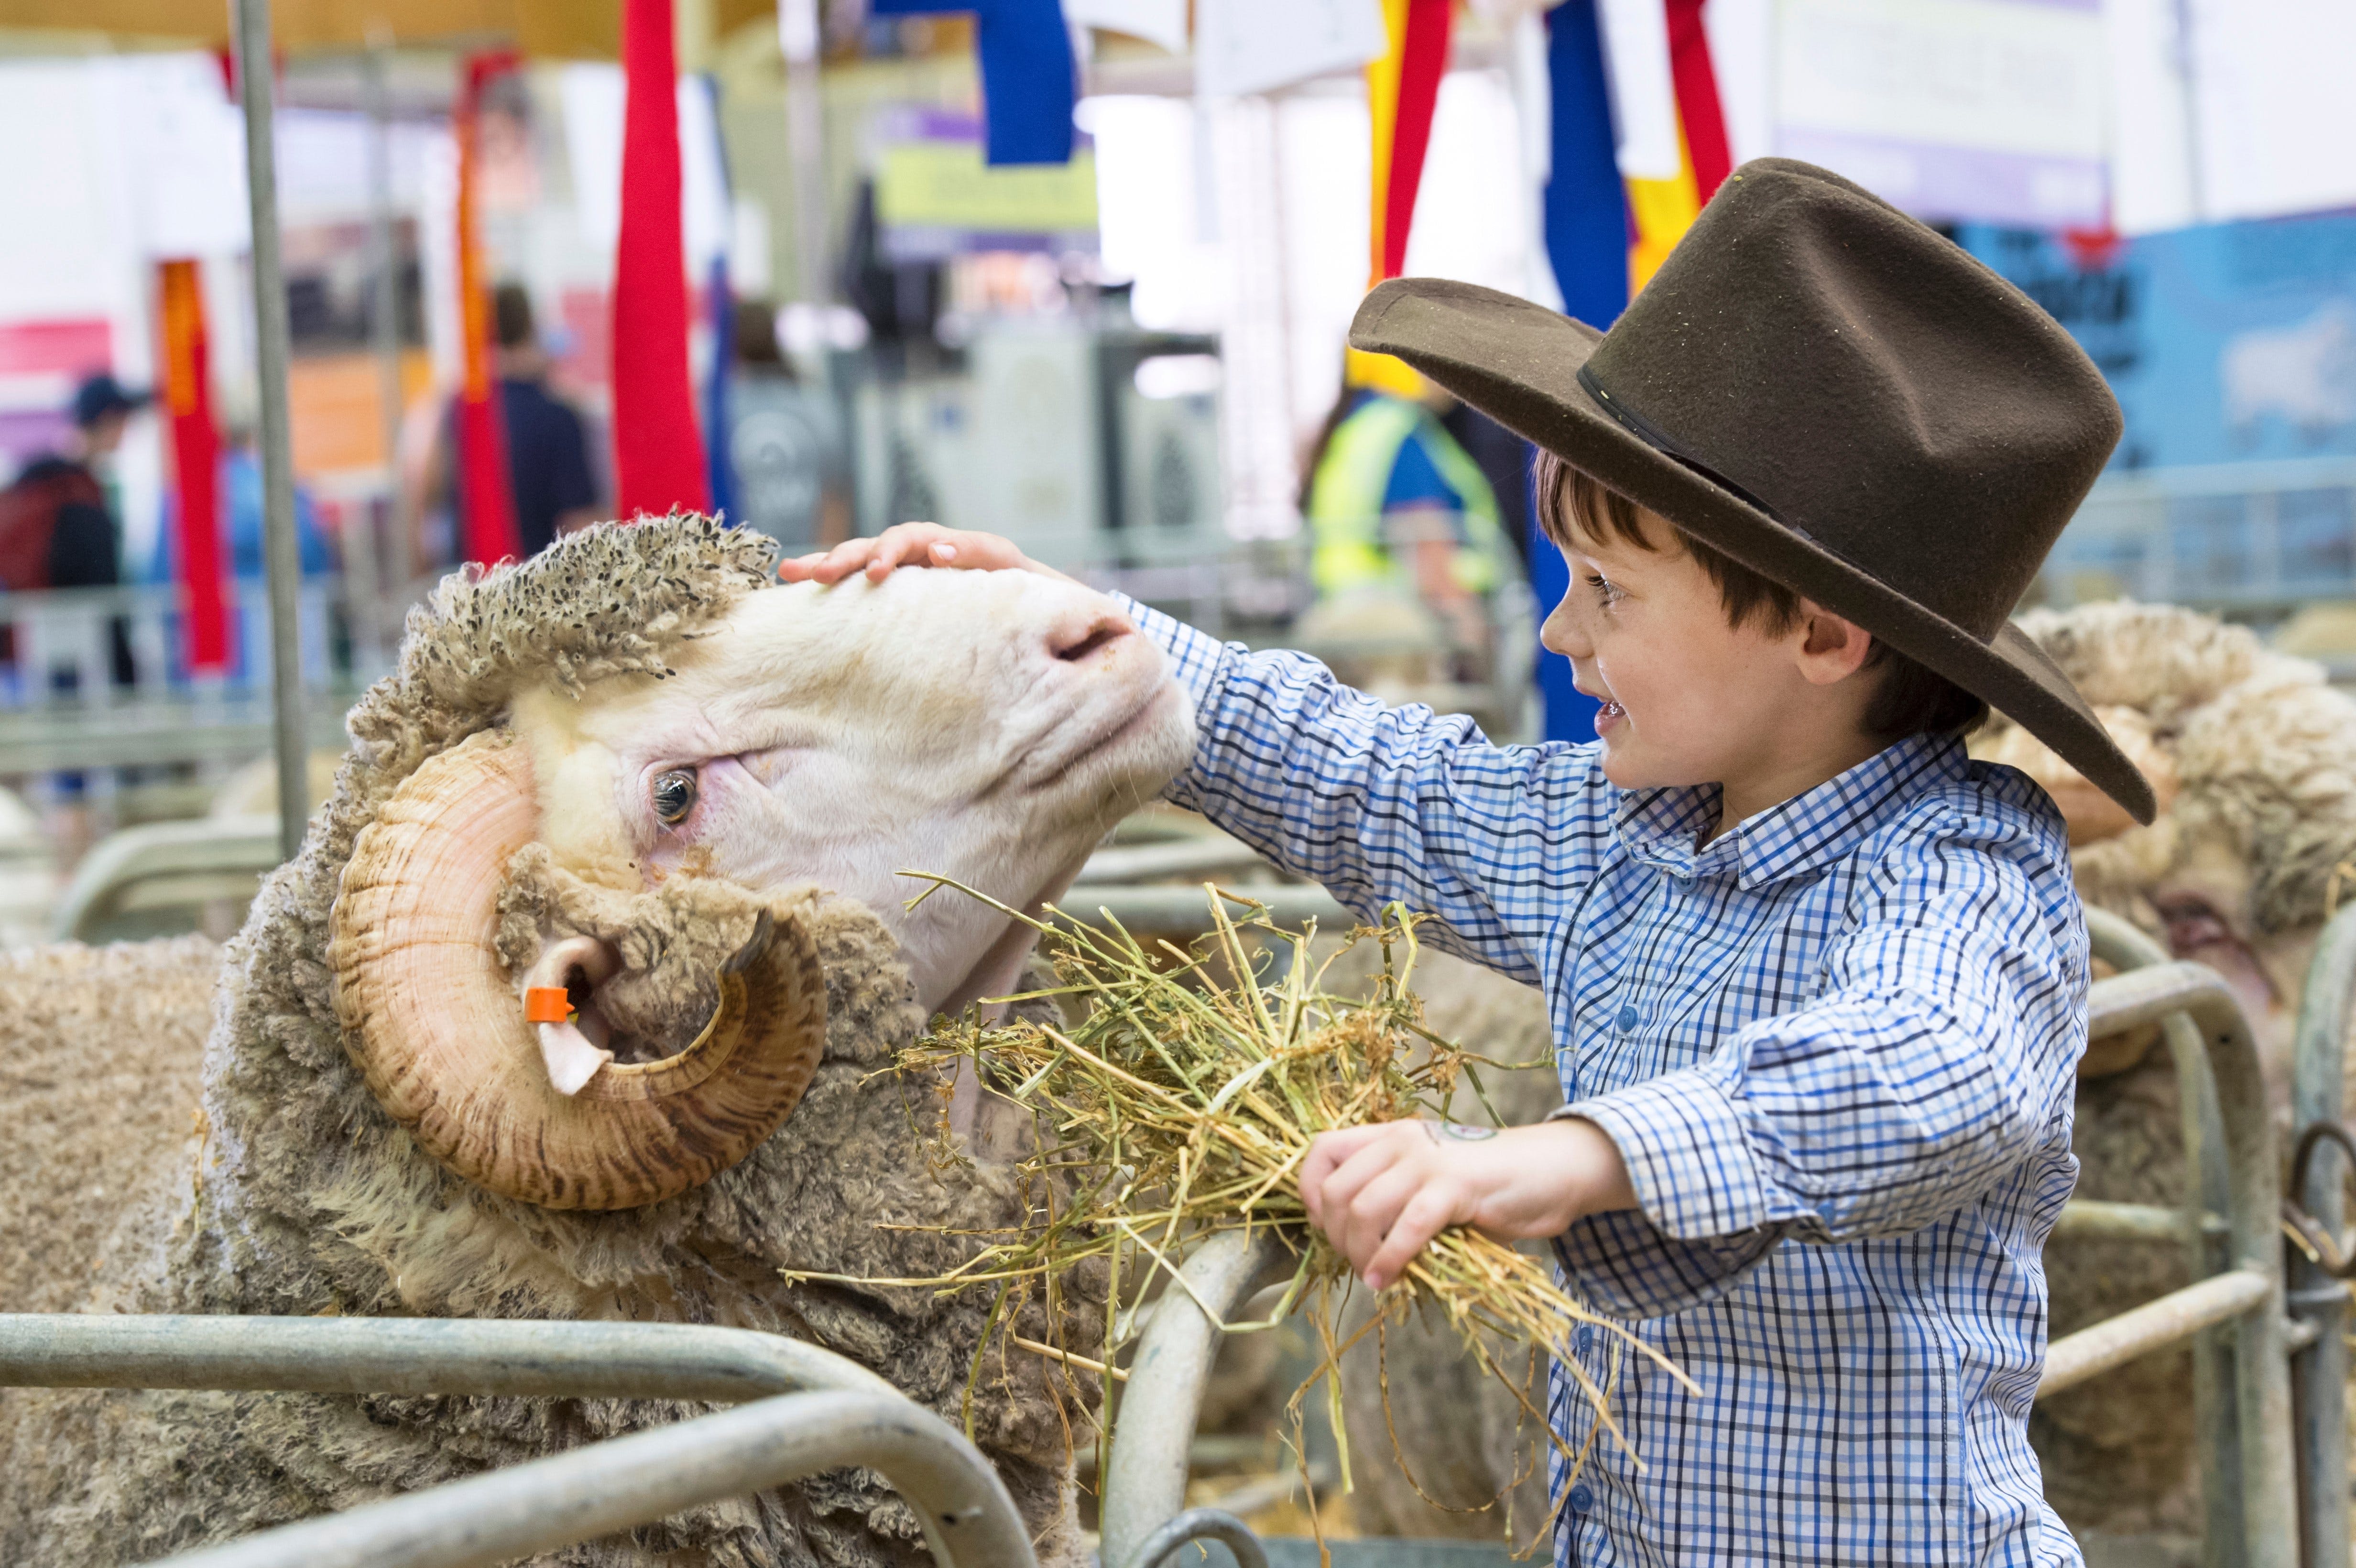 Sydney Royal Easter Show - Tourism Bookings WA